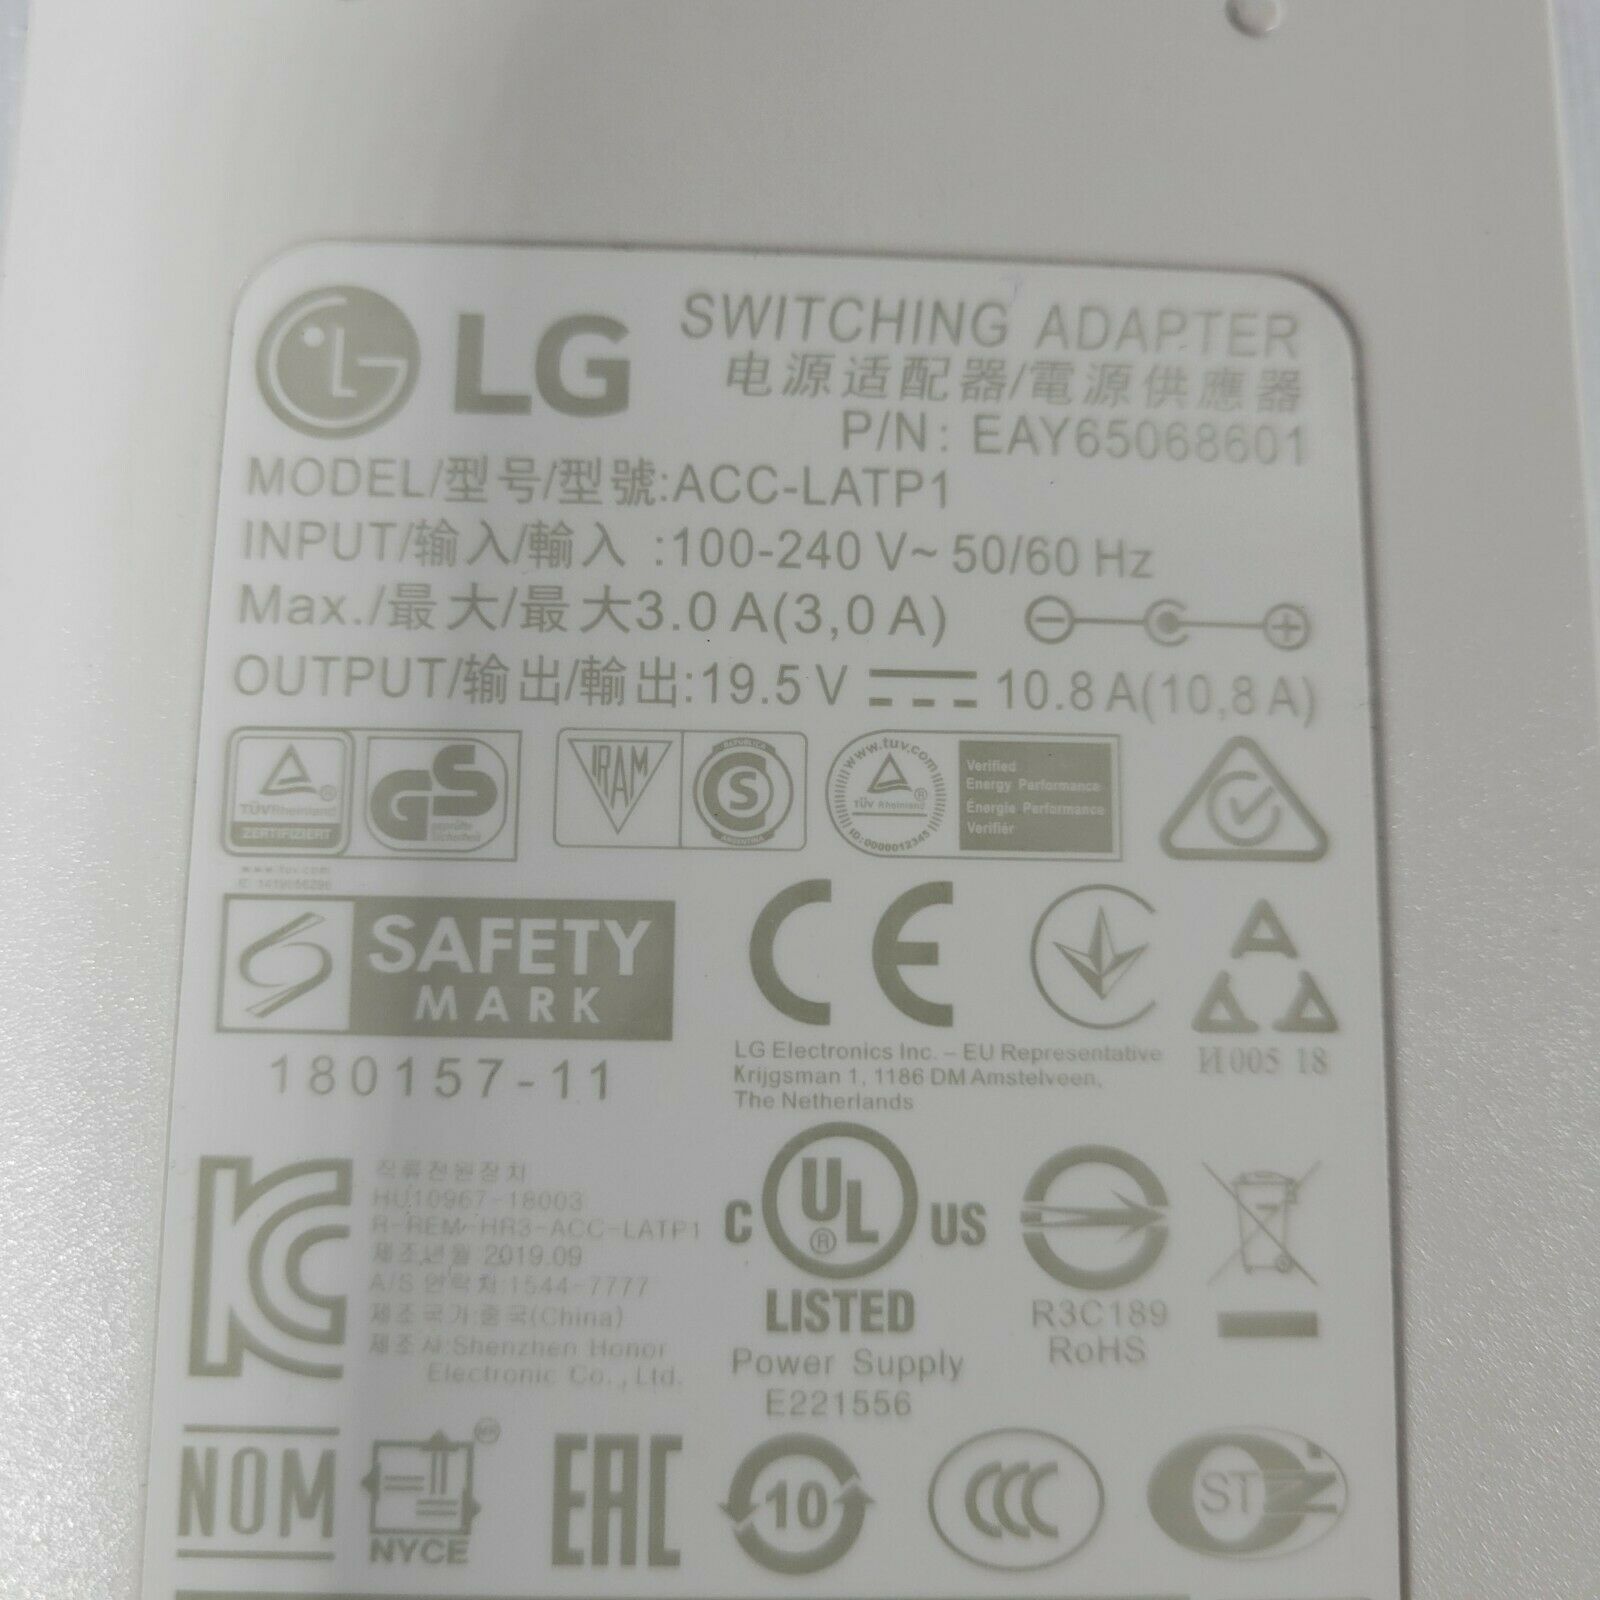 LG ACC-LATP1 Genuine Original SWITCHING ADAPTER Power Supply Charger 19.5V AC Country/Region of Manufacture: China Cu